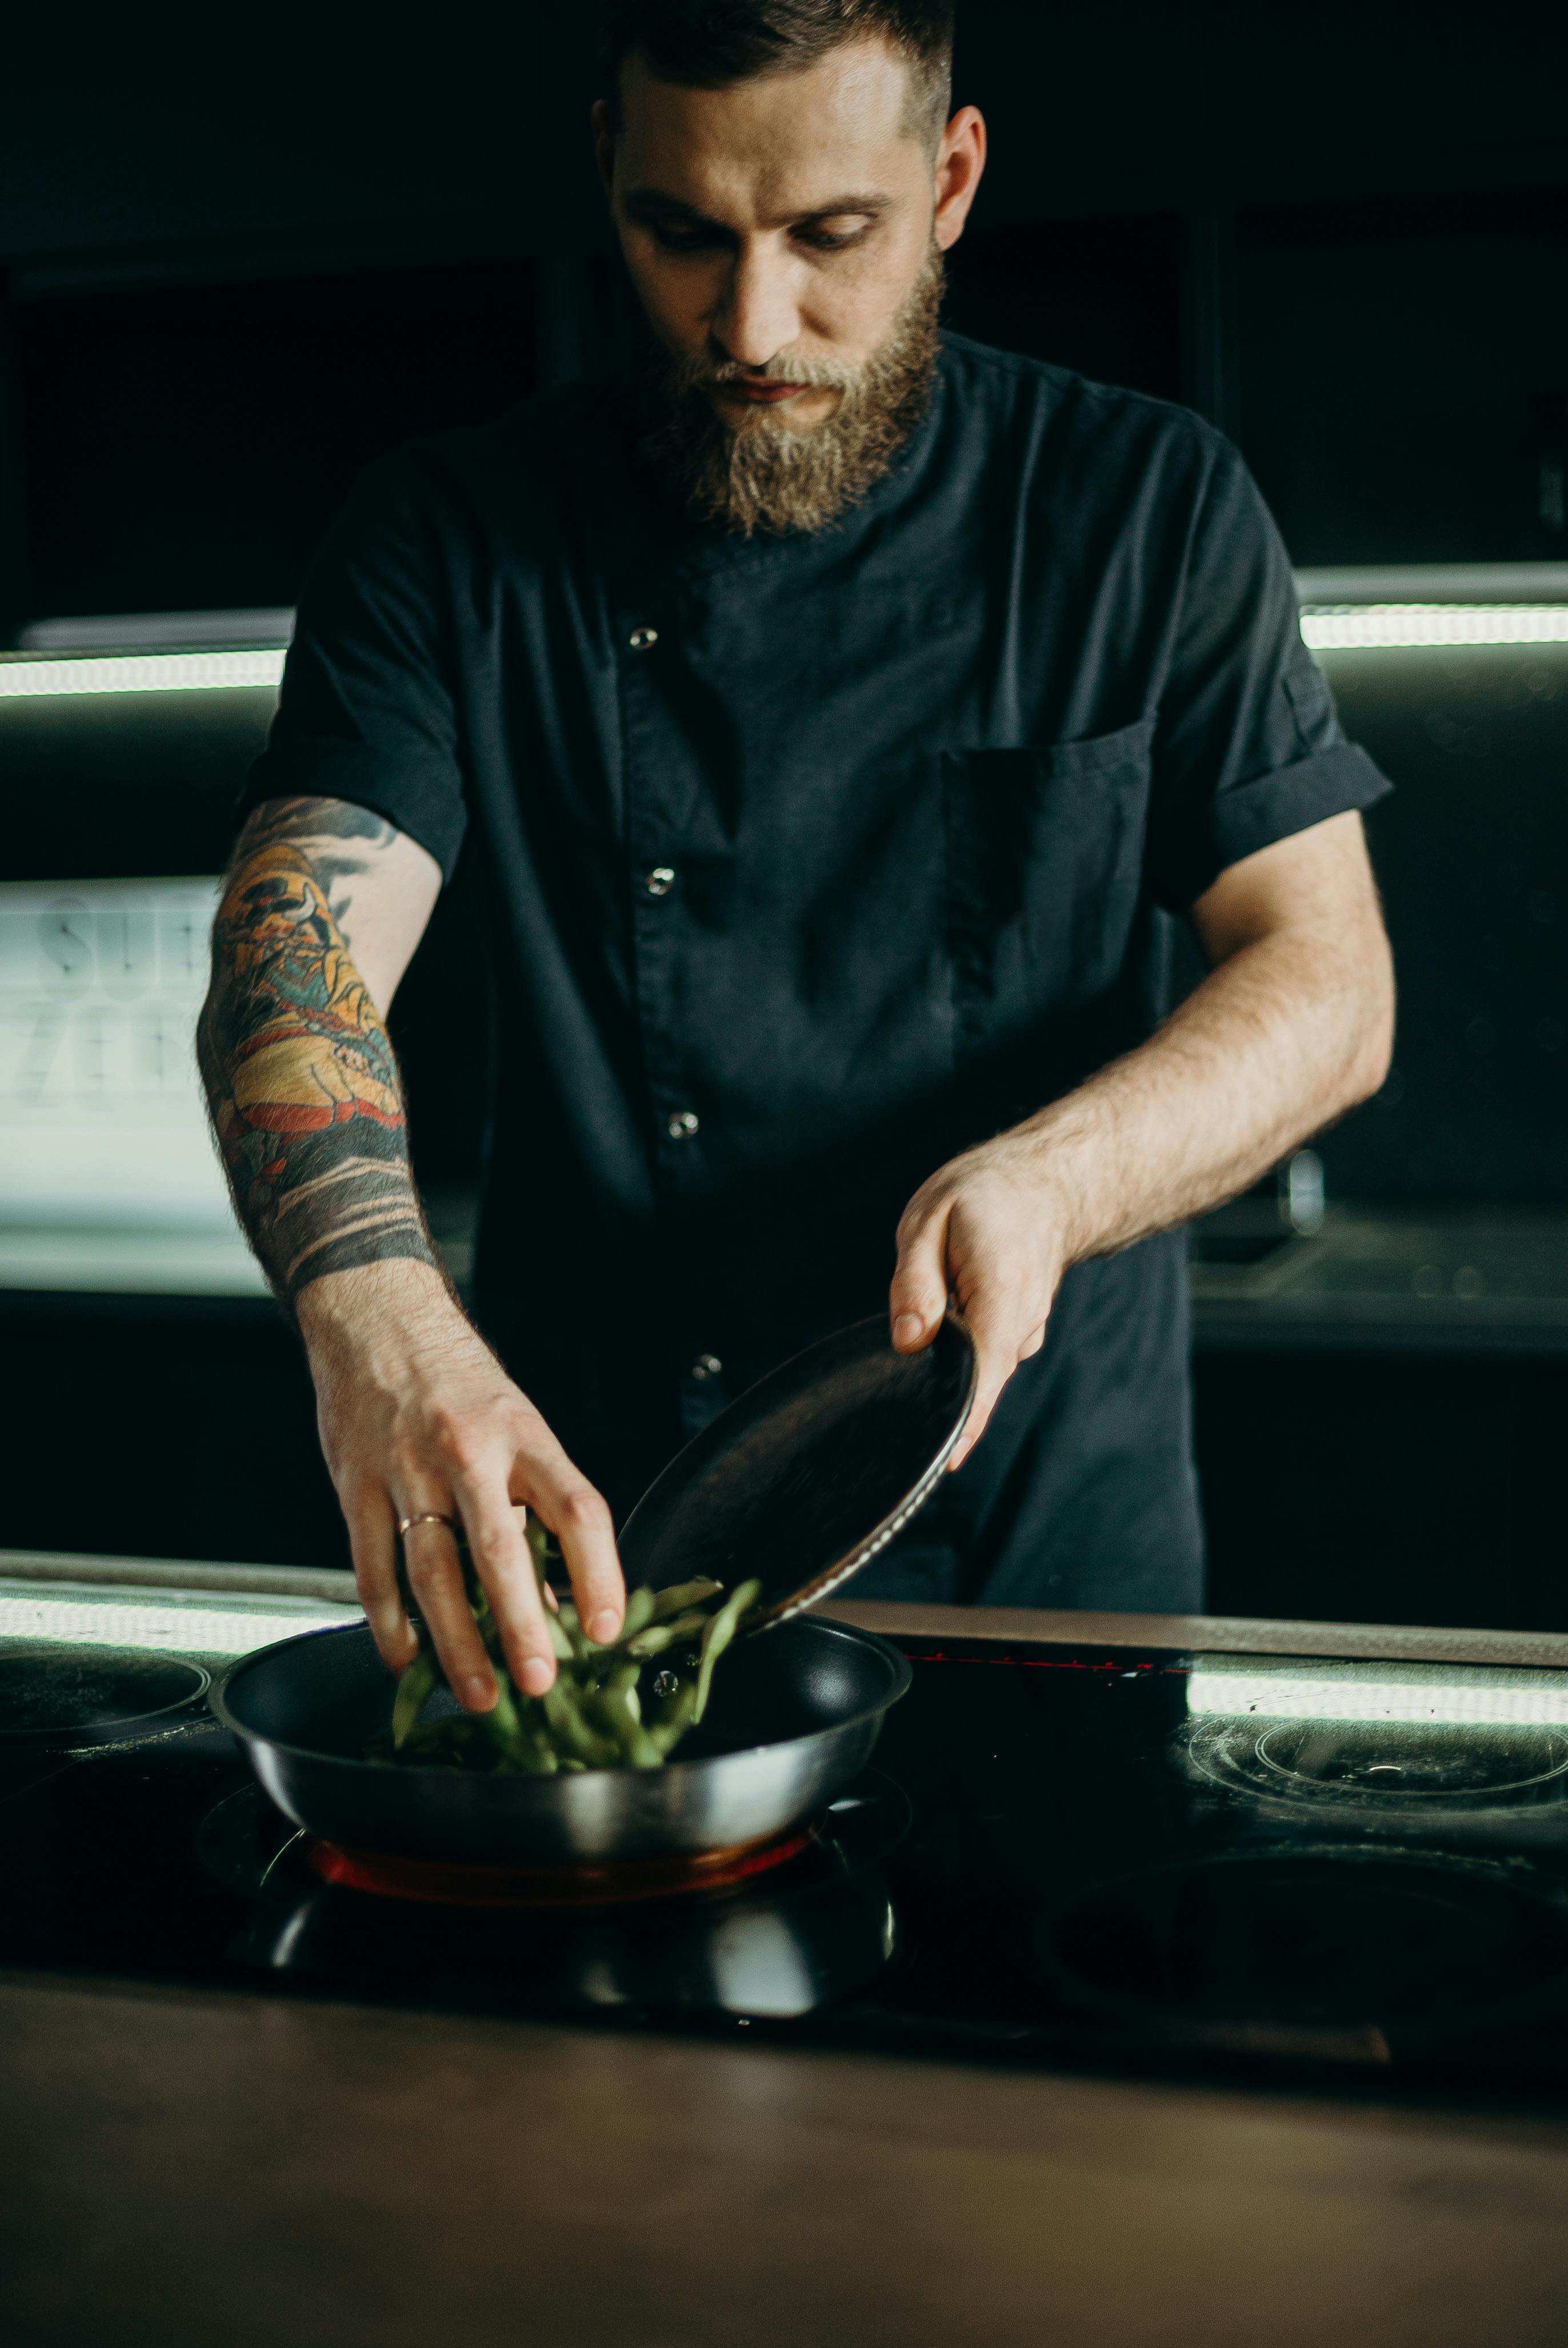 The chef | Source: Pexels